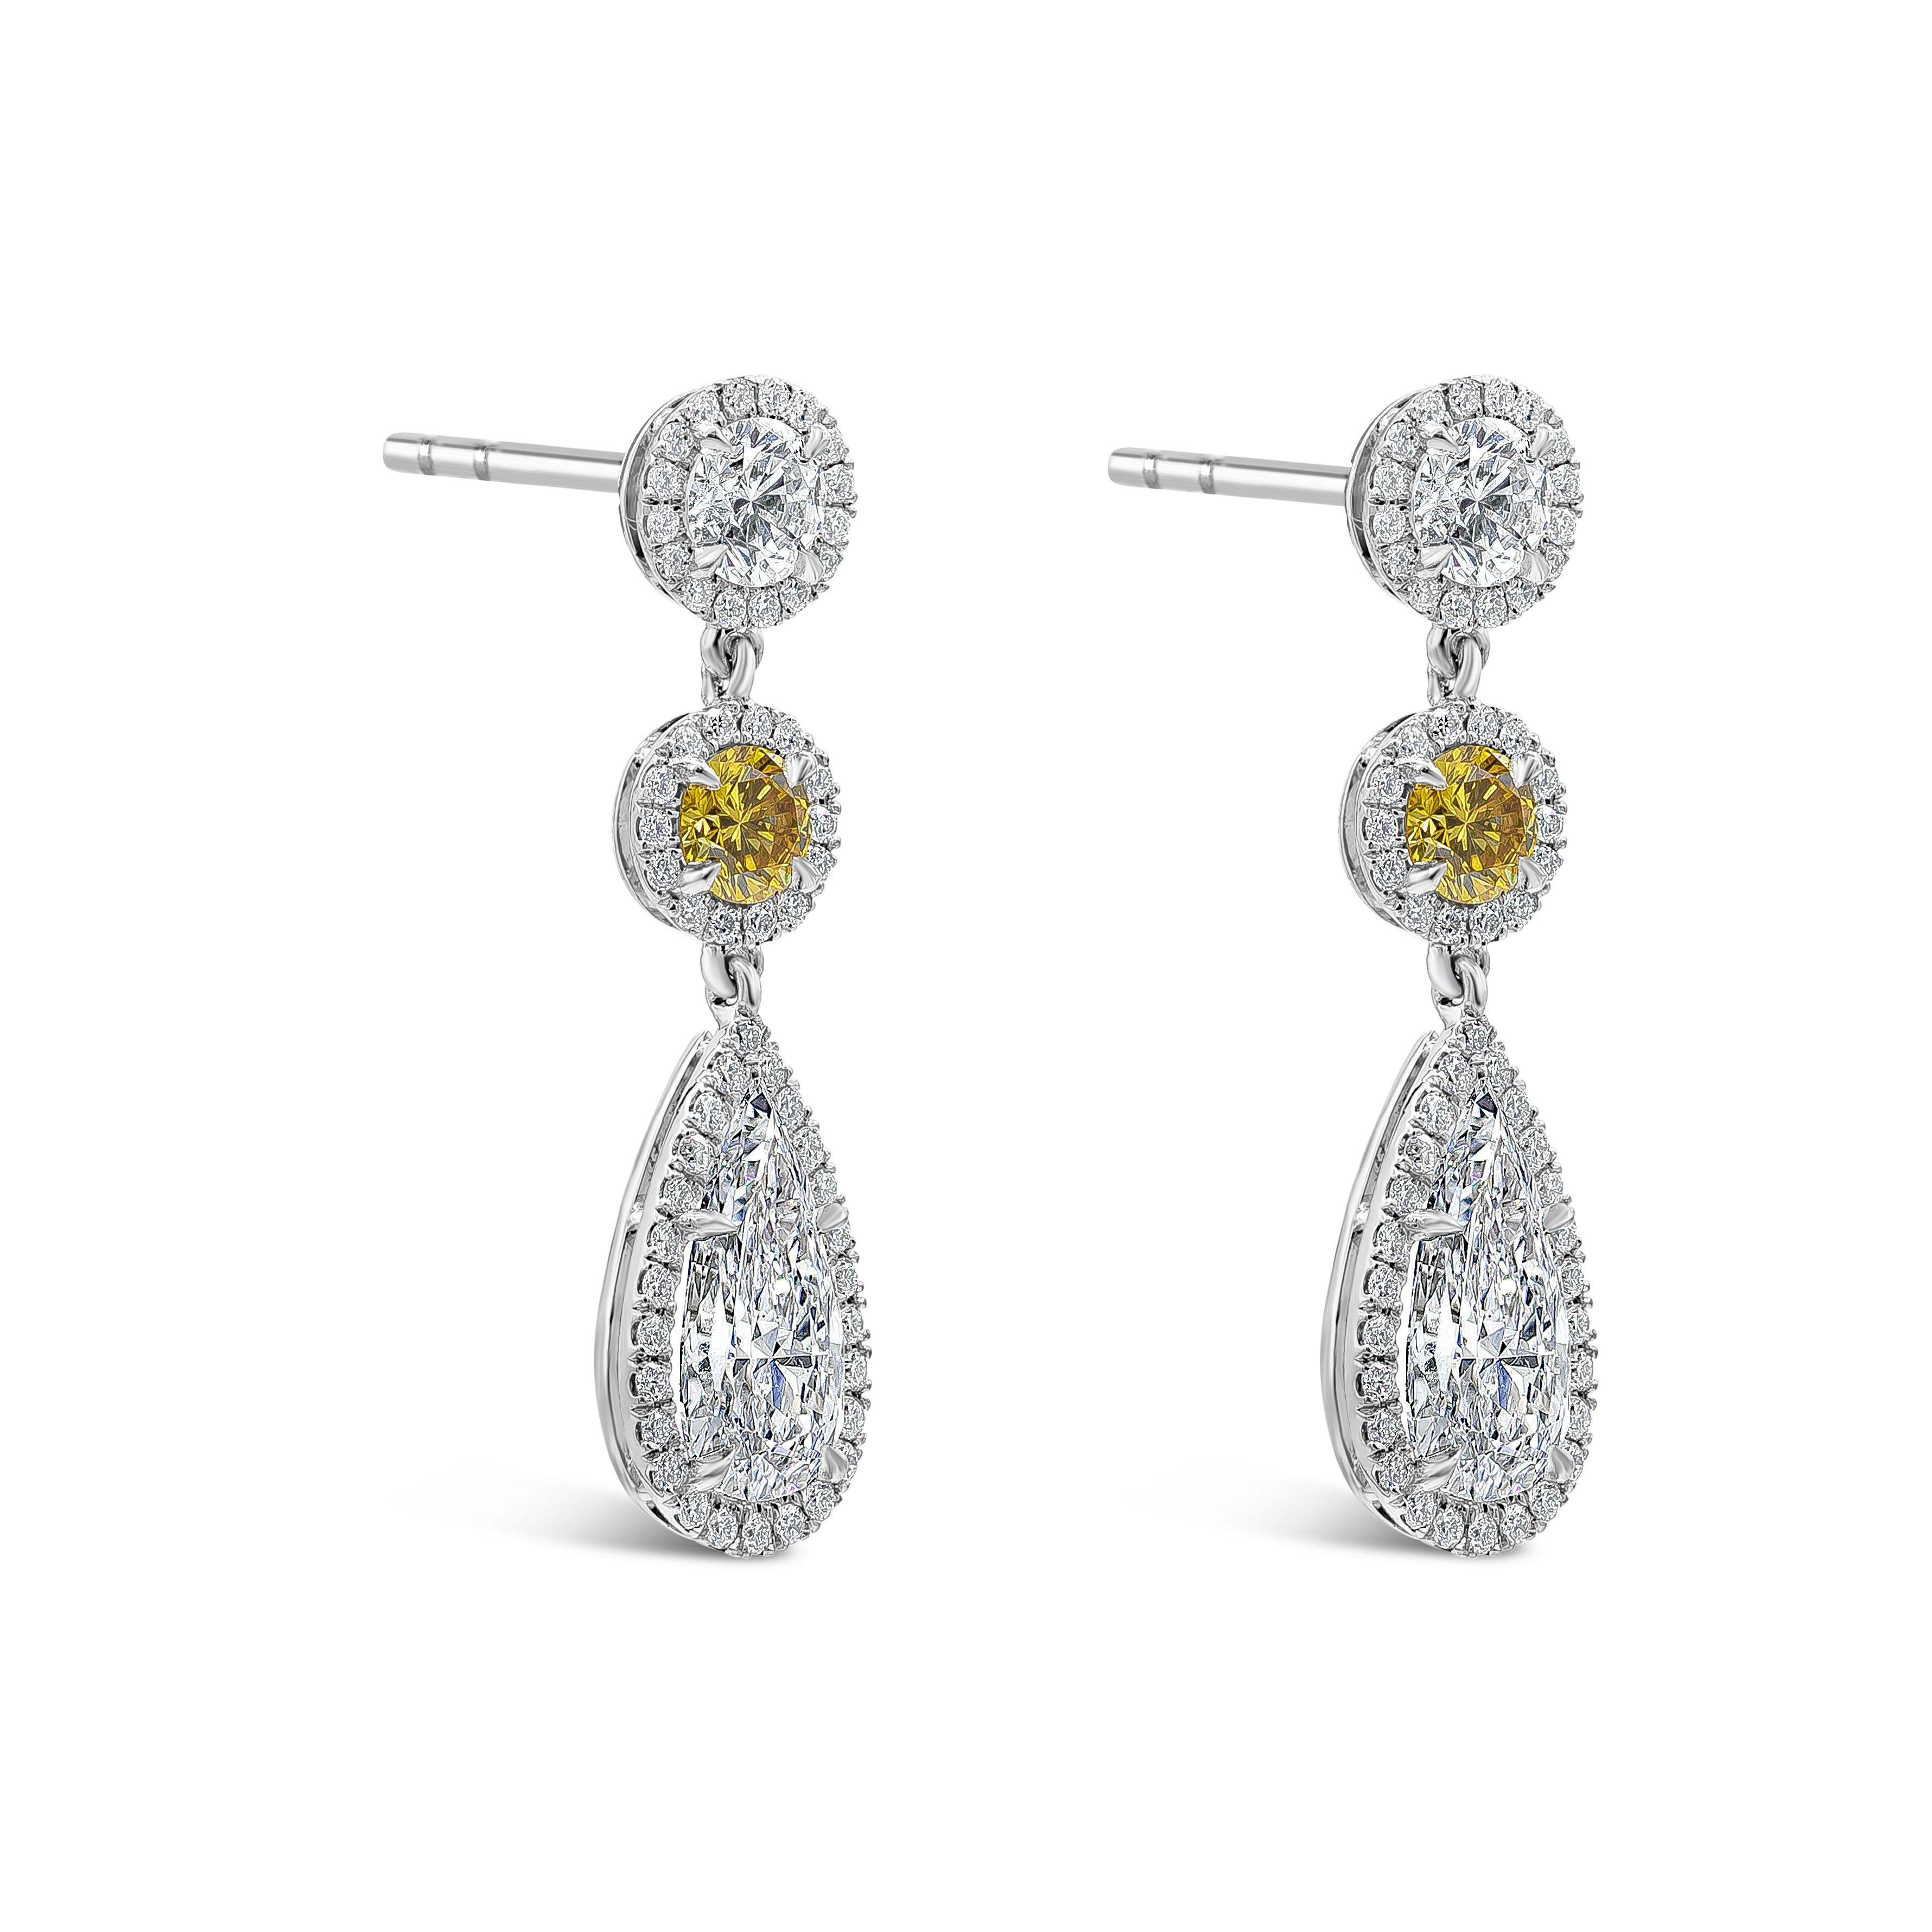 This stunning dangle earrings features two GIA Certified pear shape diamonds weighing 2.07 carats total, D Color and Si1 in Clarity. Two GIA Certified round cut fancy intense yellow diamond weighing 0.41 carats total. Suspended on a round brilliant